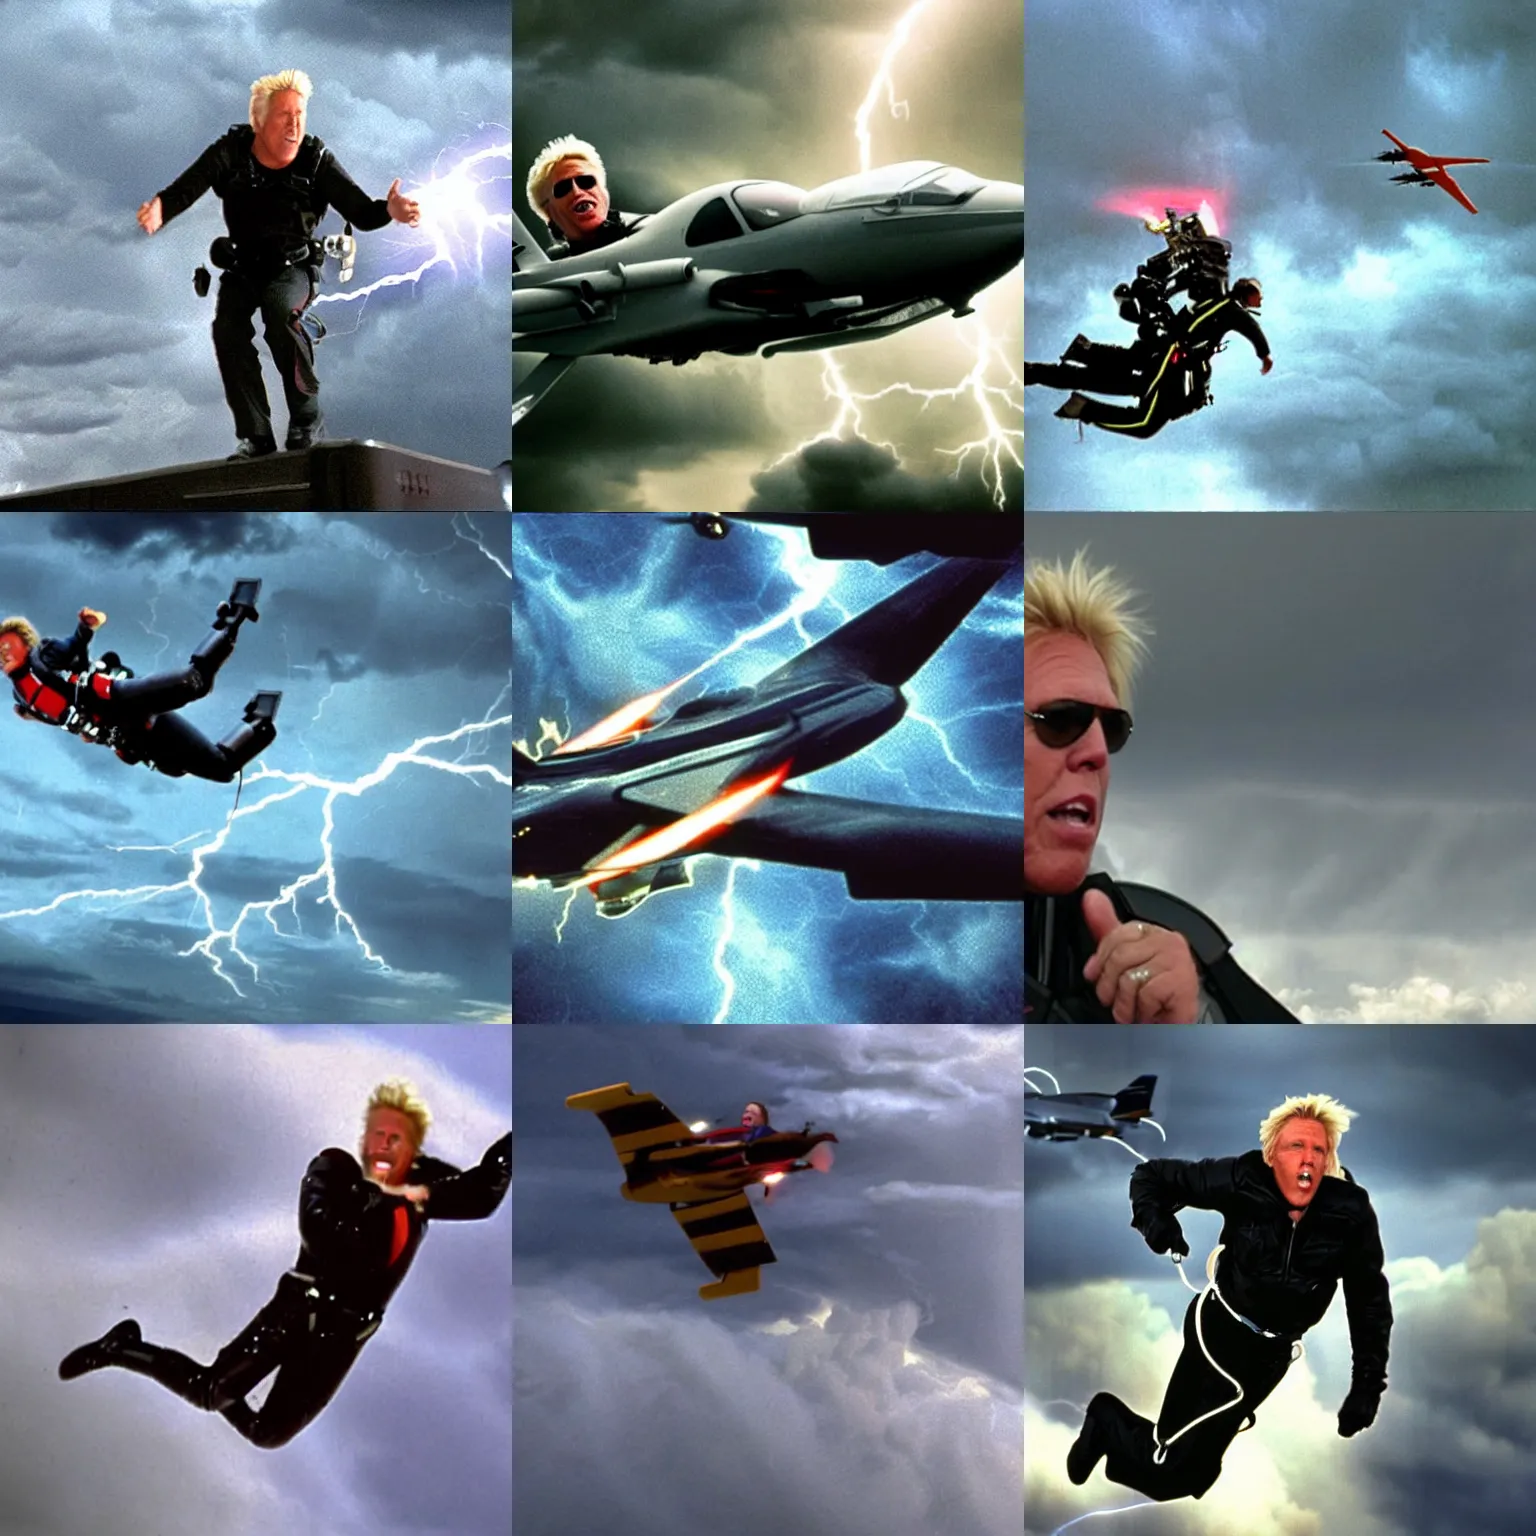 Prompt: gary busey flies through a stormy sky on a jet pack lightning archs across the background movie still